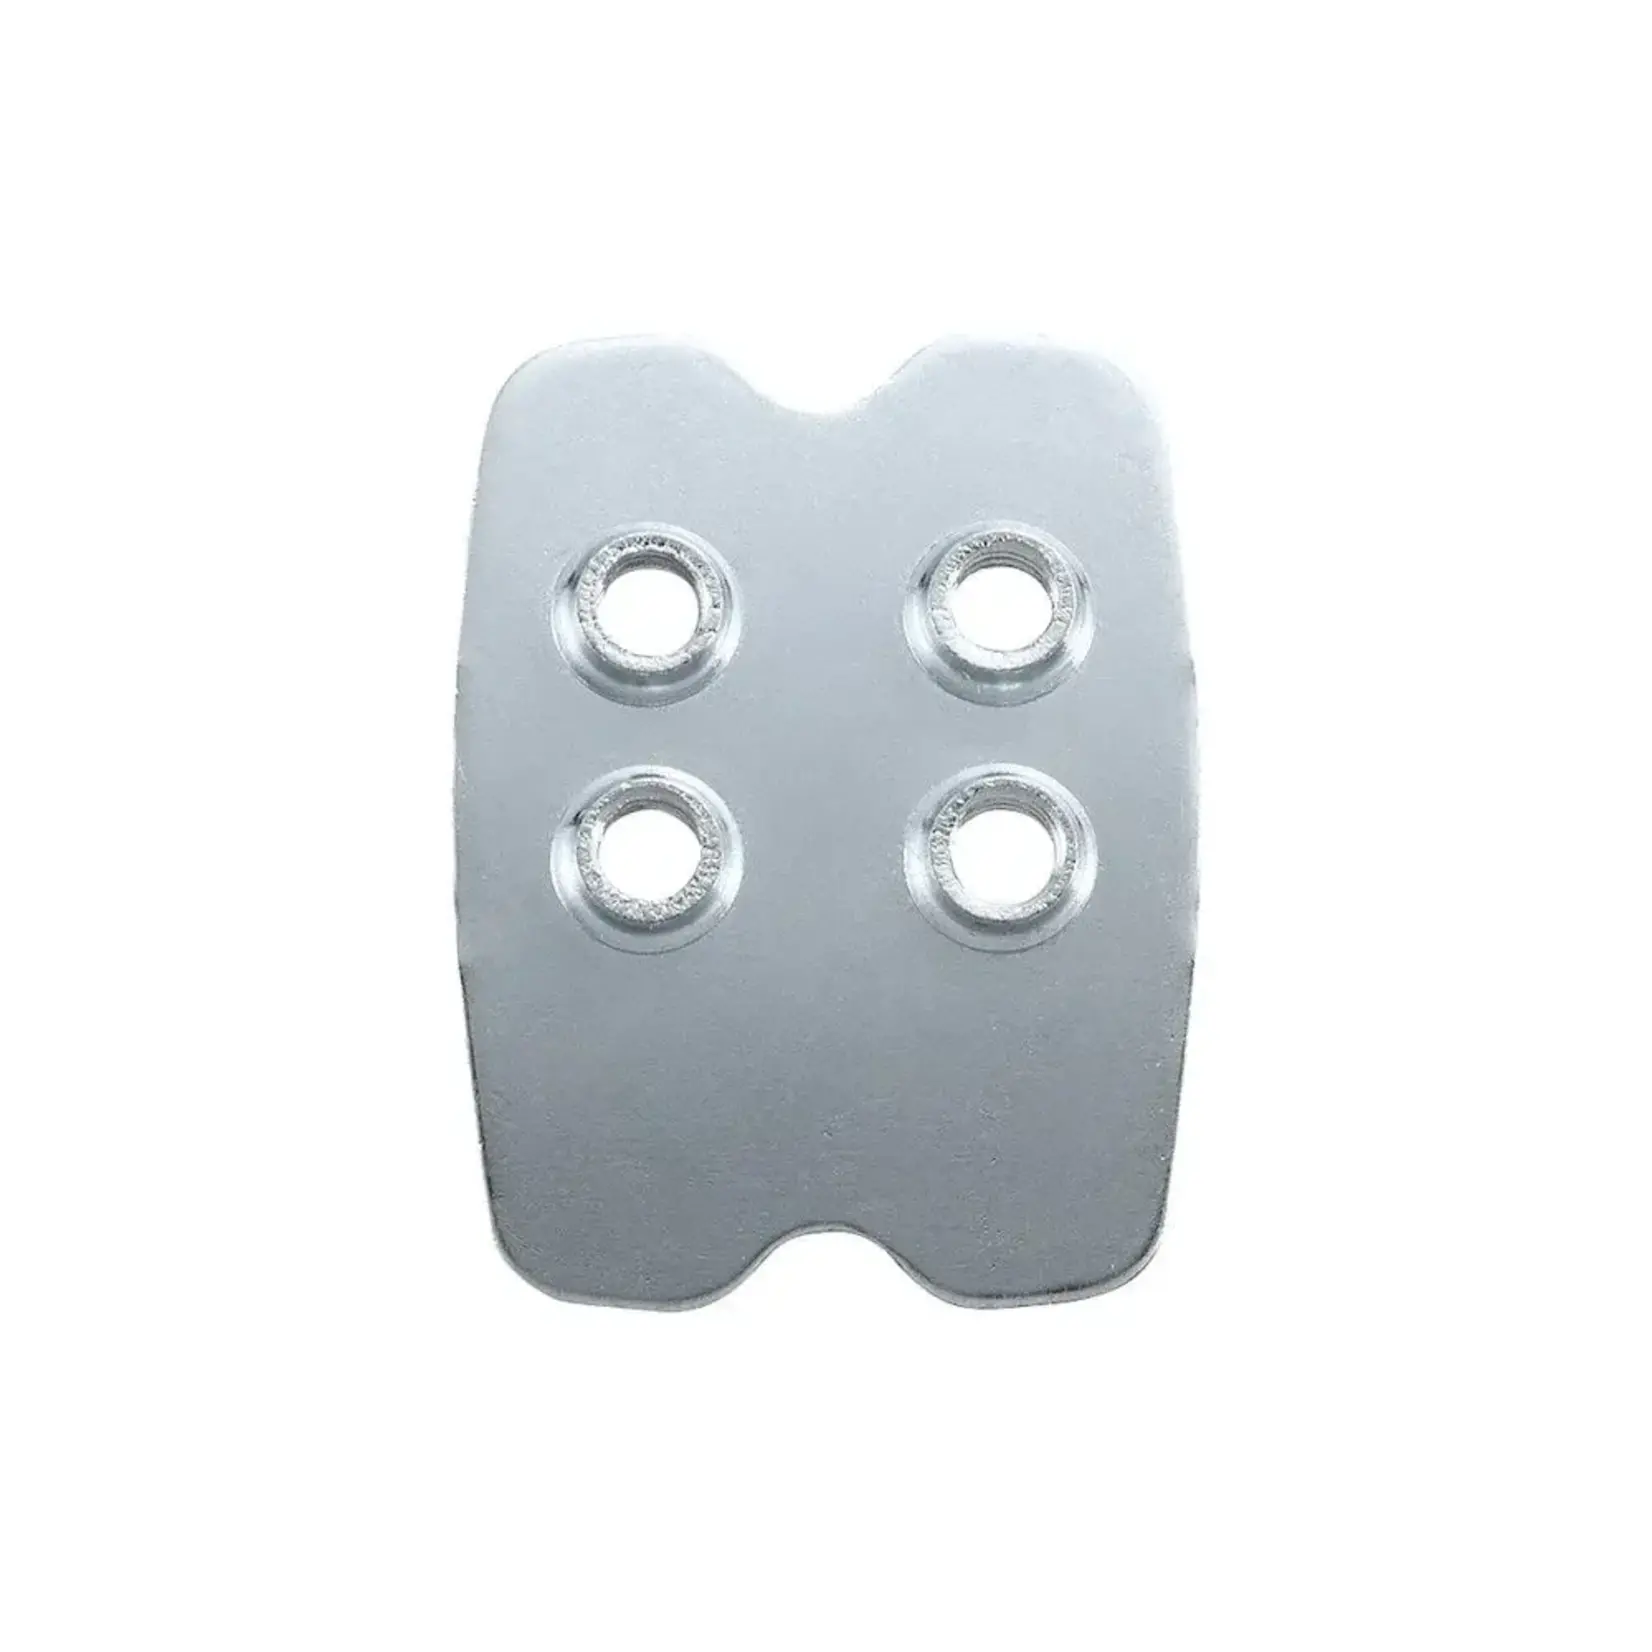 SHIMANO Shimano SHA200 Cleat Plates for Shoes EACH